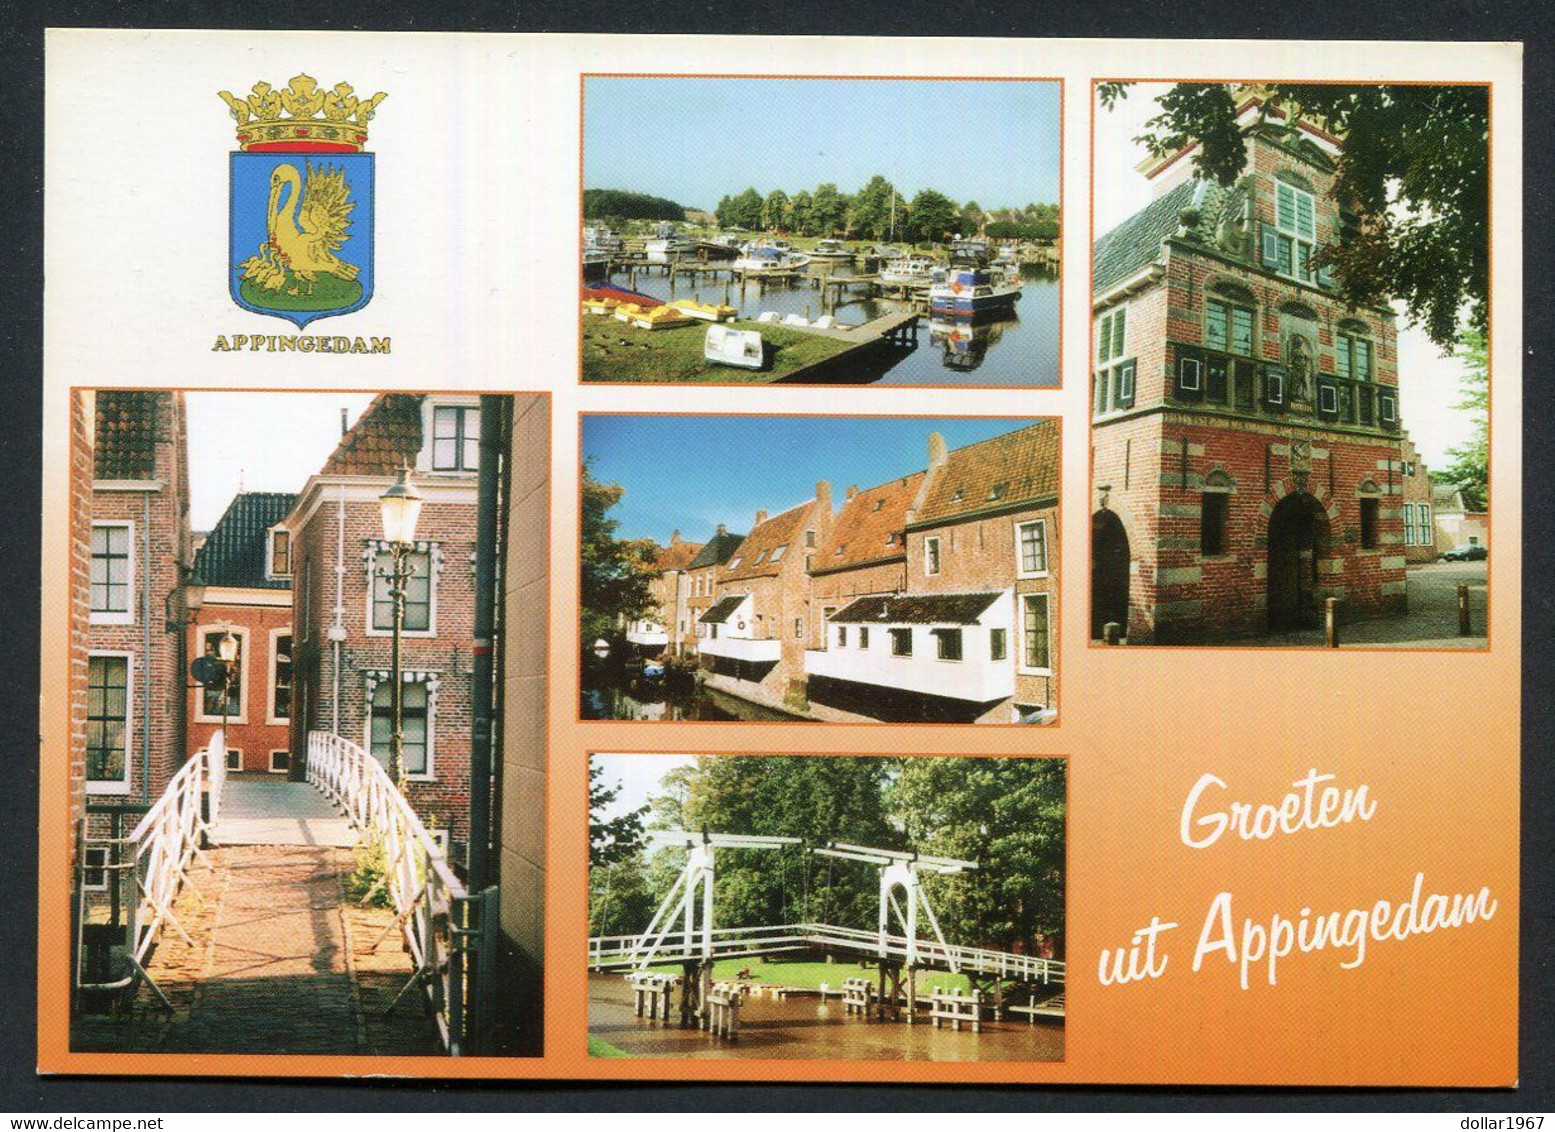 Appingedam .- NOT Used ,2 Scans For Condition. (Originalscan !! ) - Appingedam